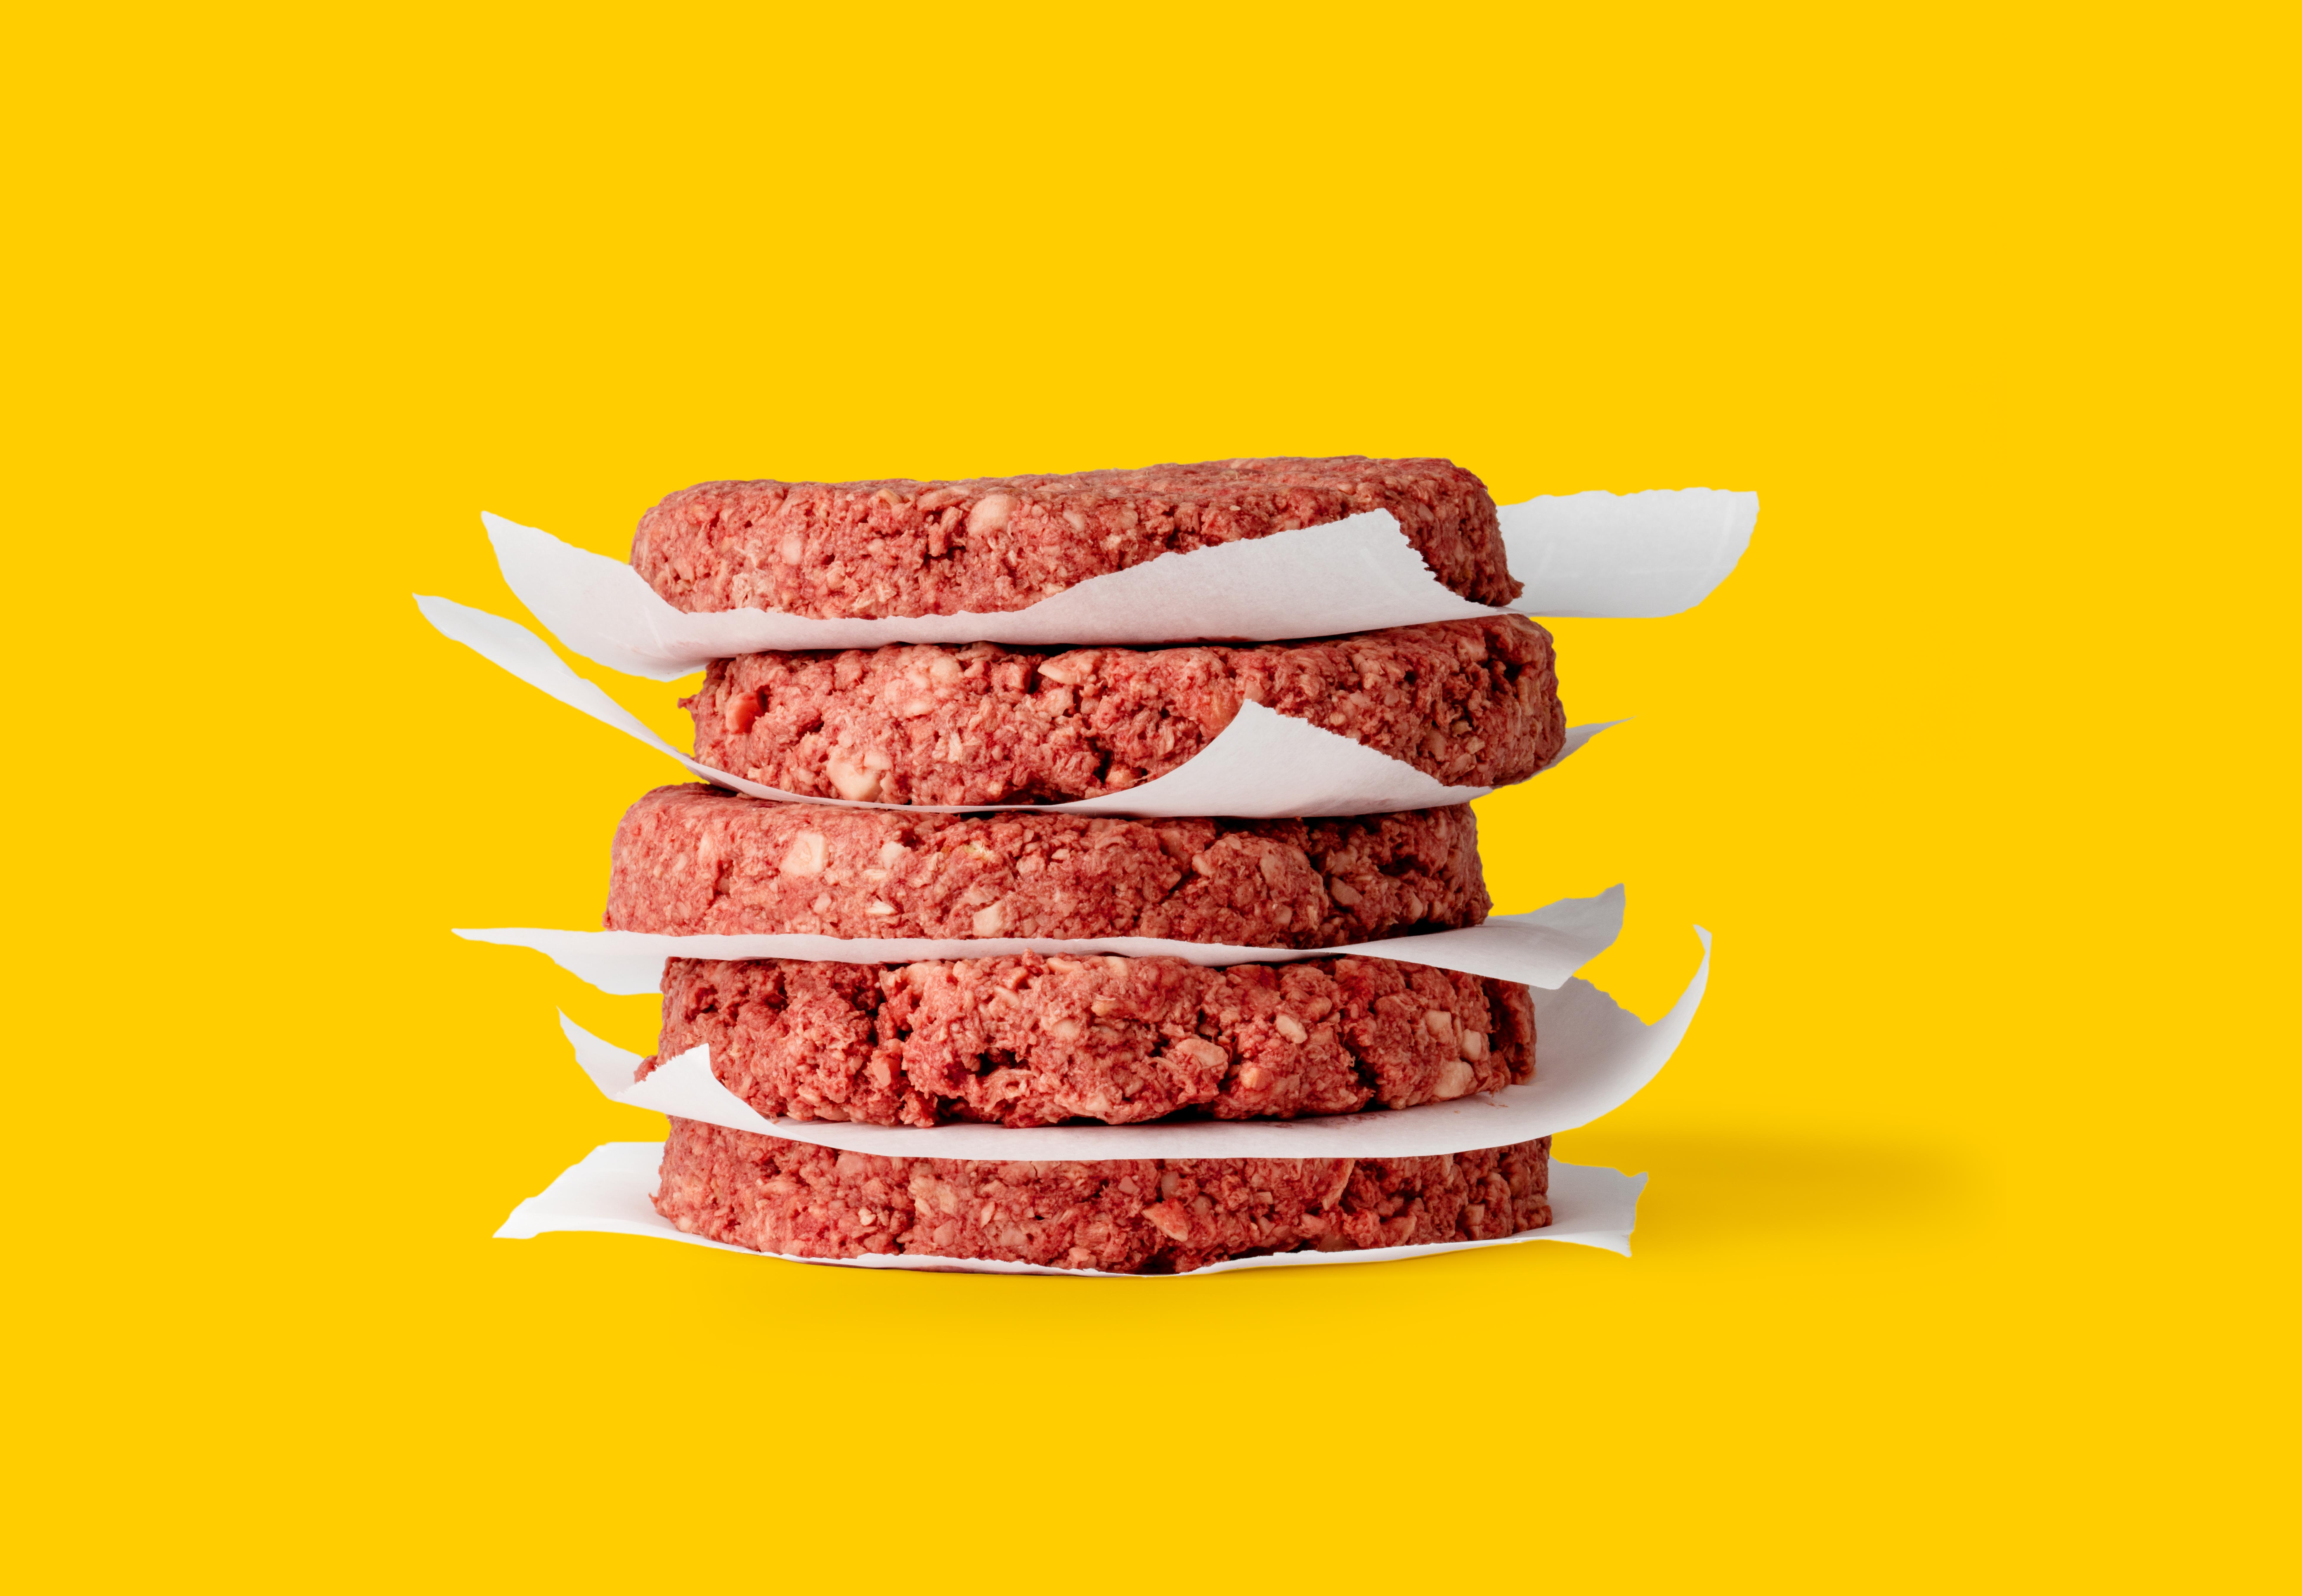 Impossible Foods Meat Made now in 200 restaurants in Singapore - sink your teeth for only S$5 - S$55 - Alvinology